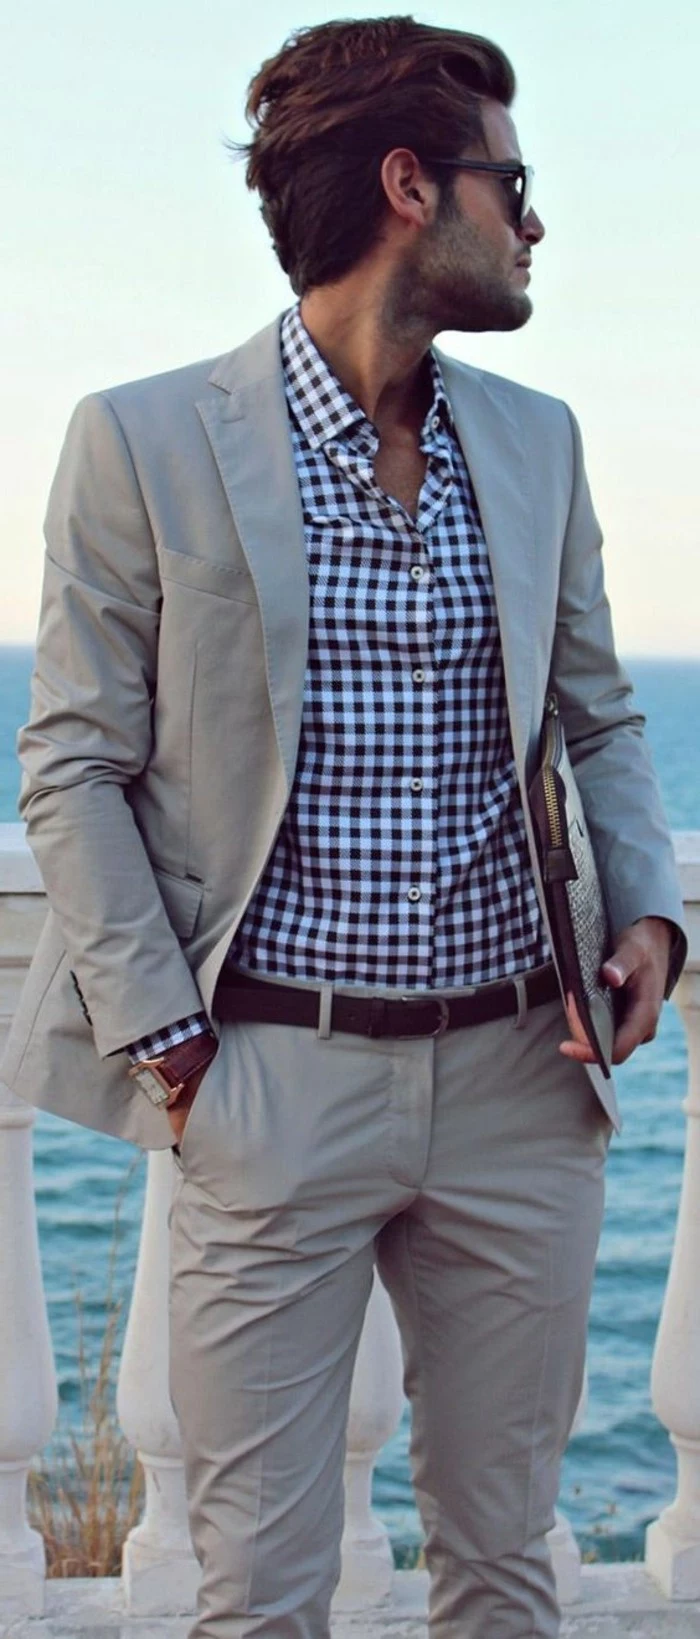 beige two piece suit, worn with blue and white checkered shirt, by brunette man, mens casual summer wedding attire, with glasses and a hand in his pocket